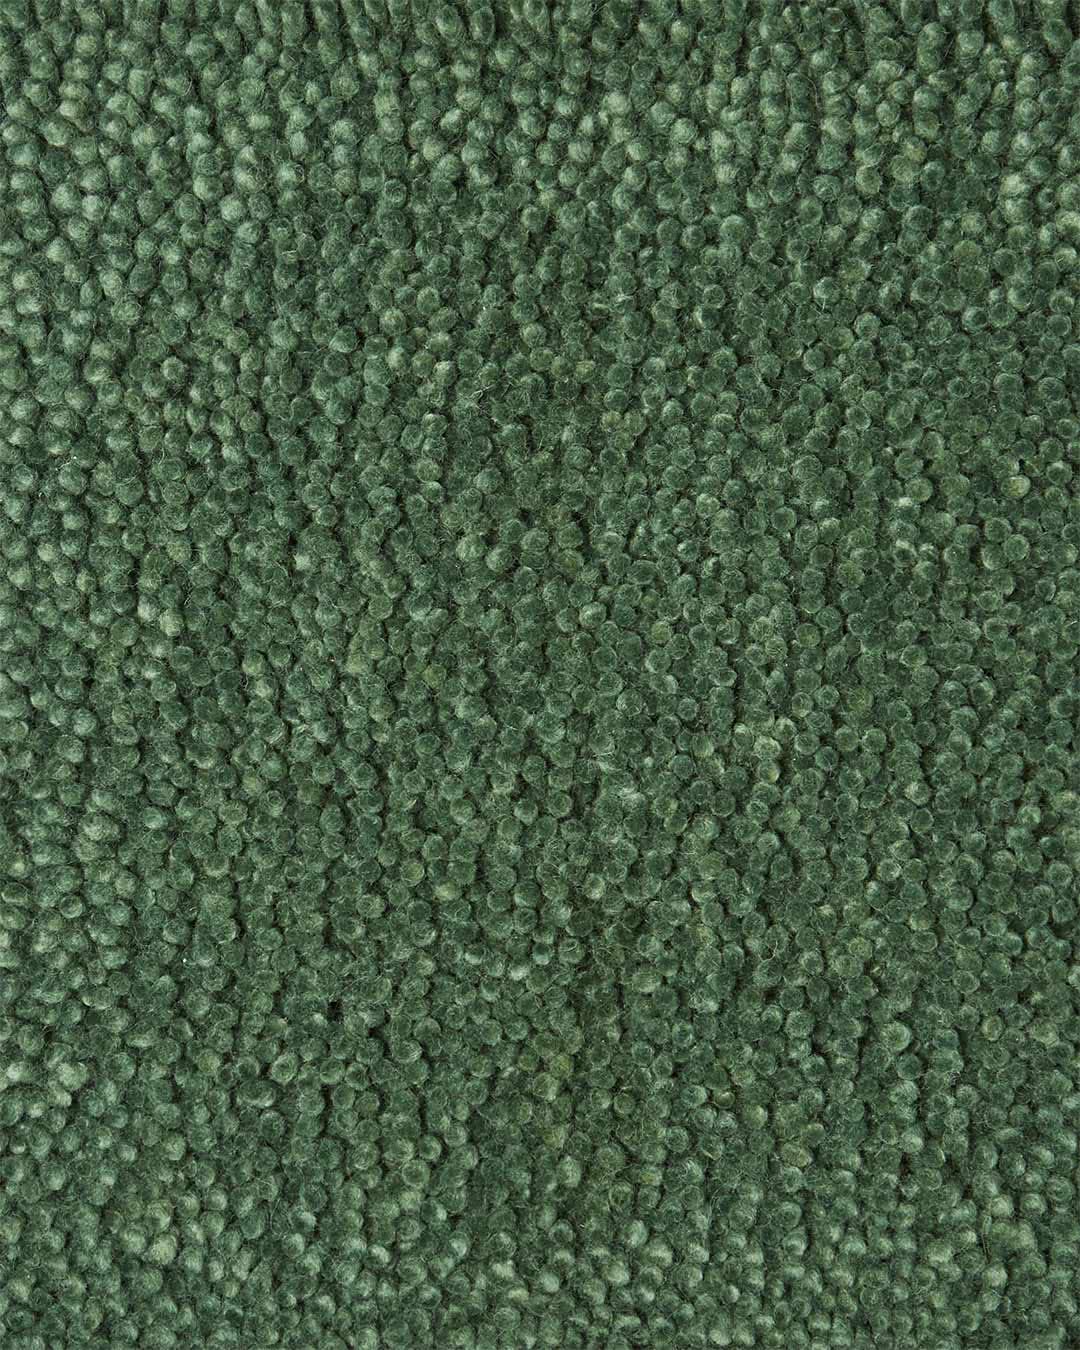 Close up view of textured Napoleon Jay Shag rug in light green colour